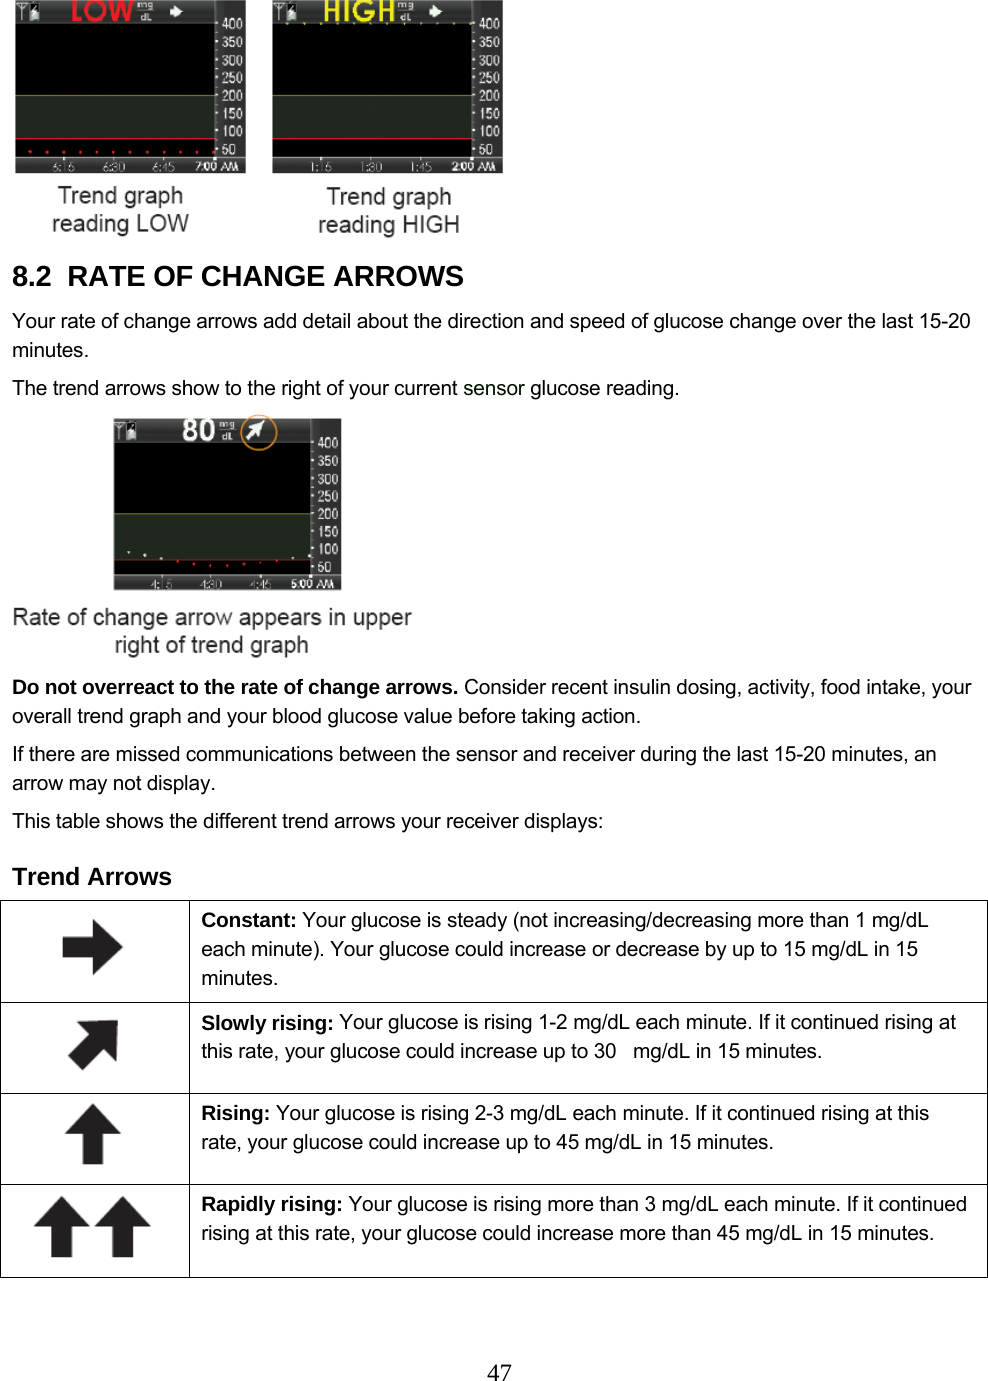 47   8.2  RATE OF CHANGE ARROWS Your rate of change arrows add detail about the direction and speed of glucose change over the last 15-20 minutes. The trend arrows show to the right of your current sensor glucose reading.  Do not overreact to the rate of change arrows. Consider recent insulin dosing, activity, food intake, your overall trend graph and your blood glucose value before taking action.  If there are missed communications between the sensor and receiver during the last 15-20 minutes, an arrow may not display. This table shows the different trend arrows your receiver displays:  Trend Arrows  Constant: Your glucose is steady (not increasing/decreasing more than 1 mg/dL each minute). Your glucose could increase or decrease by up to 15 mg/dL in 15 minutes.  Slowly rising: Your glucose is rising 1-2 mg/dL each minute. If it continued rising at this rate, your glucose could increase up to 30   mg/dL in 15 minutes.  Rising: Your glucose is rising 2-3 mg/dL each minute. If it continued rising at this rate, your glucose could increase up to 45 mg/dL in 15 minutes.  Rapidly rising: Your glucose is rising more than 3 mg/dL each minute. If it continued rising at this rate, your glucose could increase more than 45 mg/dL in 15 minutes. 